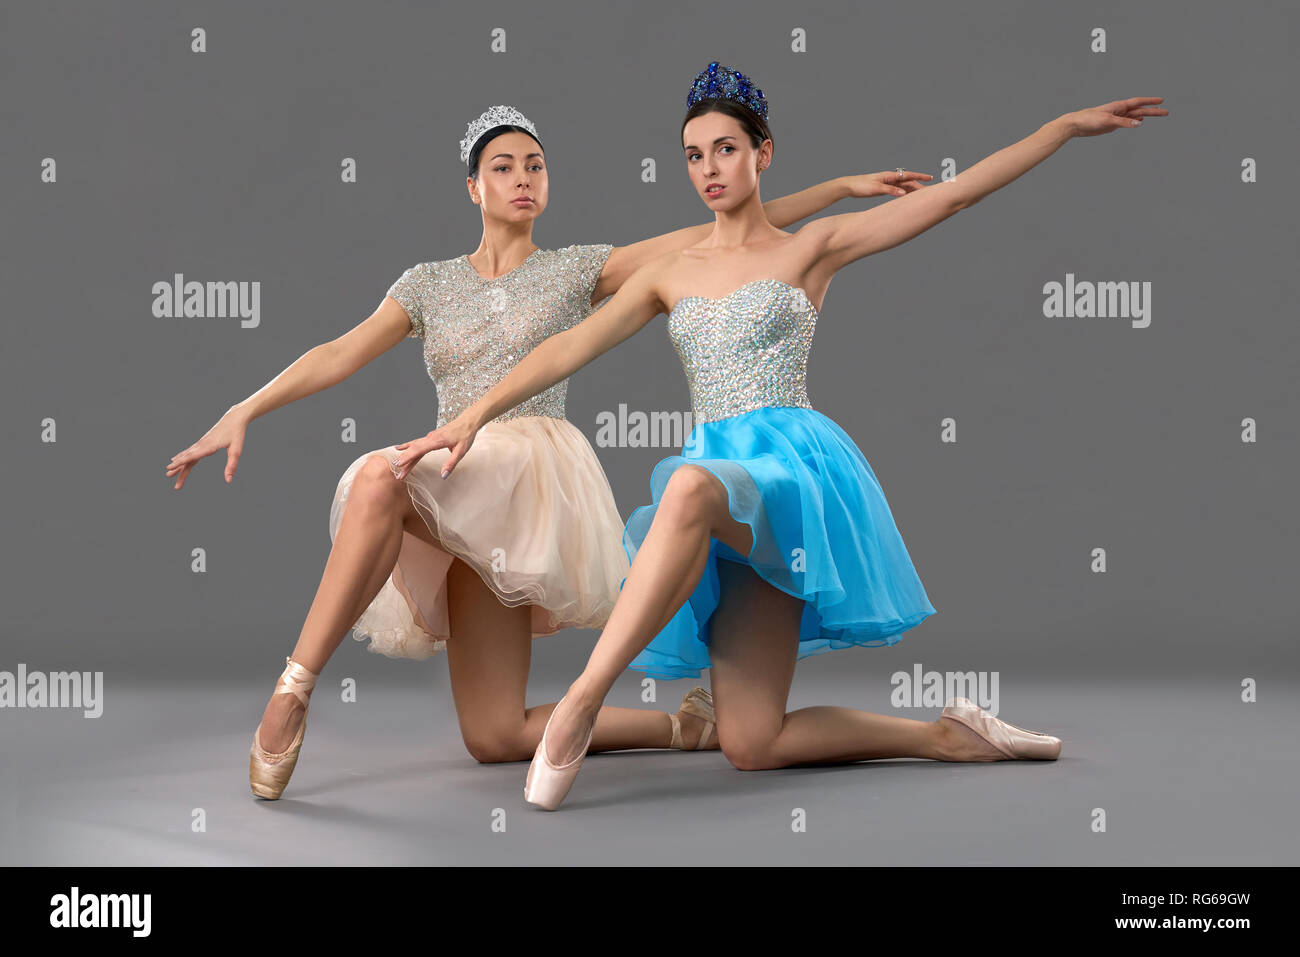 Adorable ballet dancers sitting on knees, raising one hand up and looking at camera in studio. Ballerinas in dresses and ballet shoes posing on grey background. Concept of performance and ballet. Stock Photo